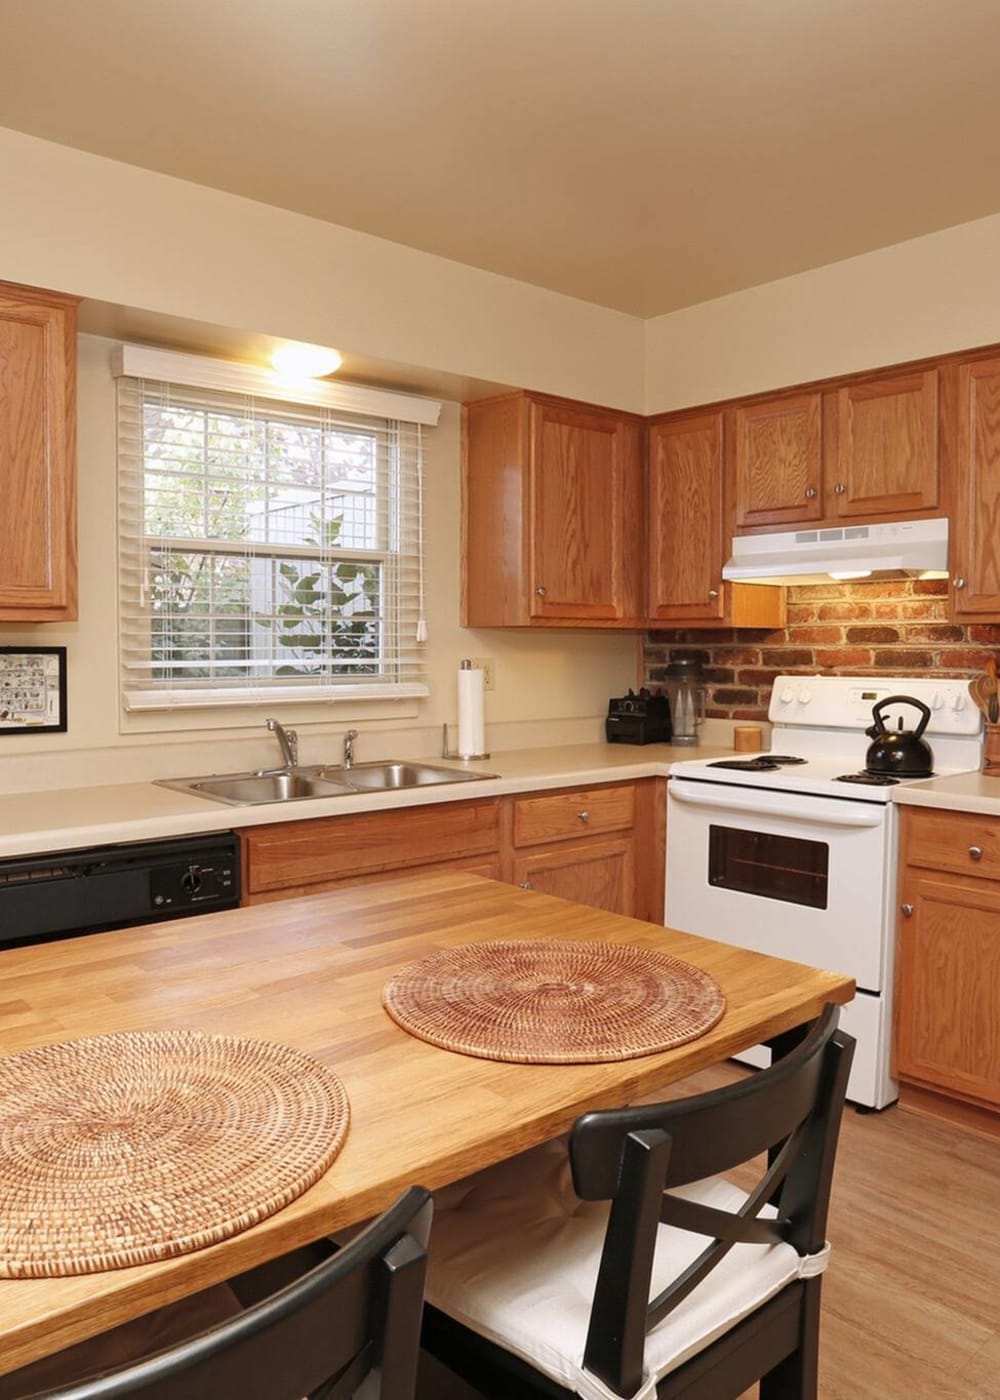 Kitchen area of a model home at River Oaks in Pittsburgh, Pennsylvania